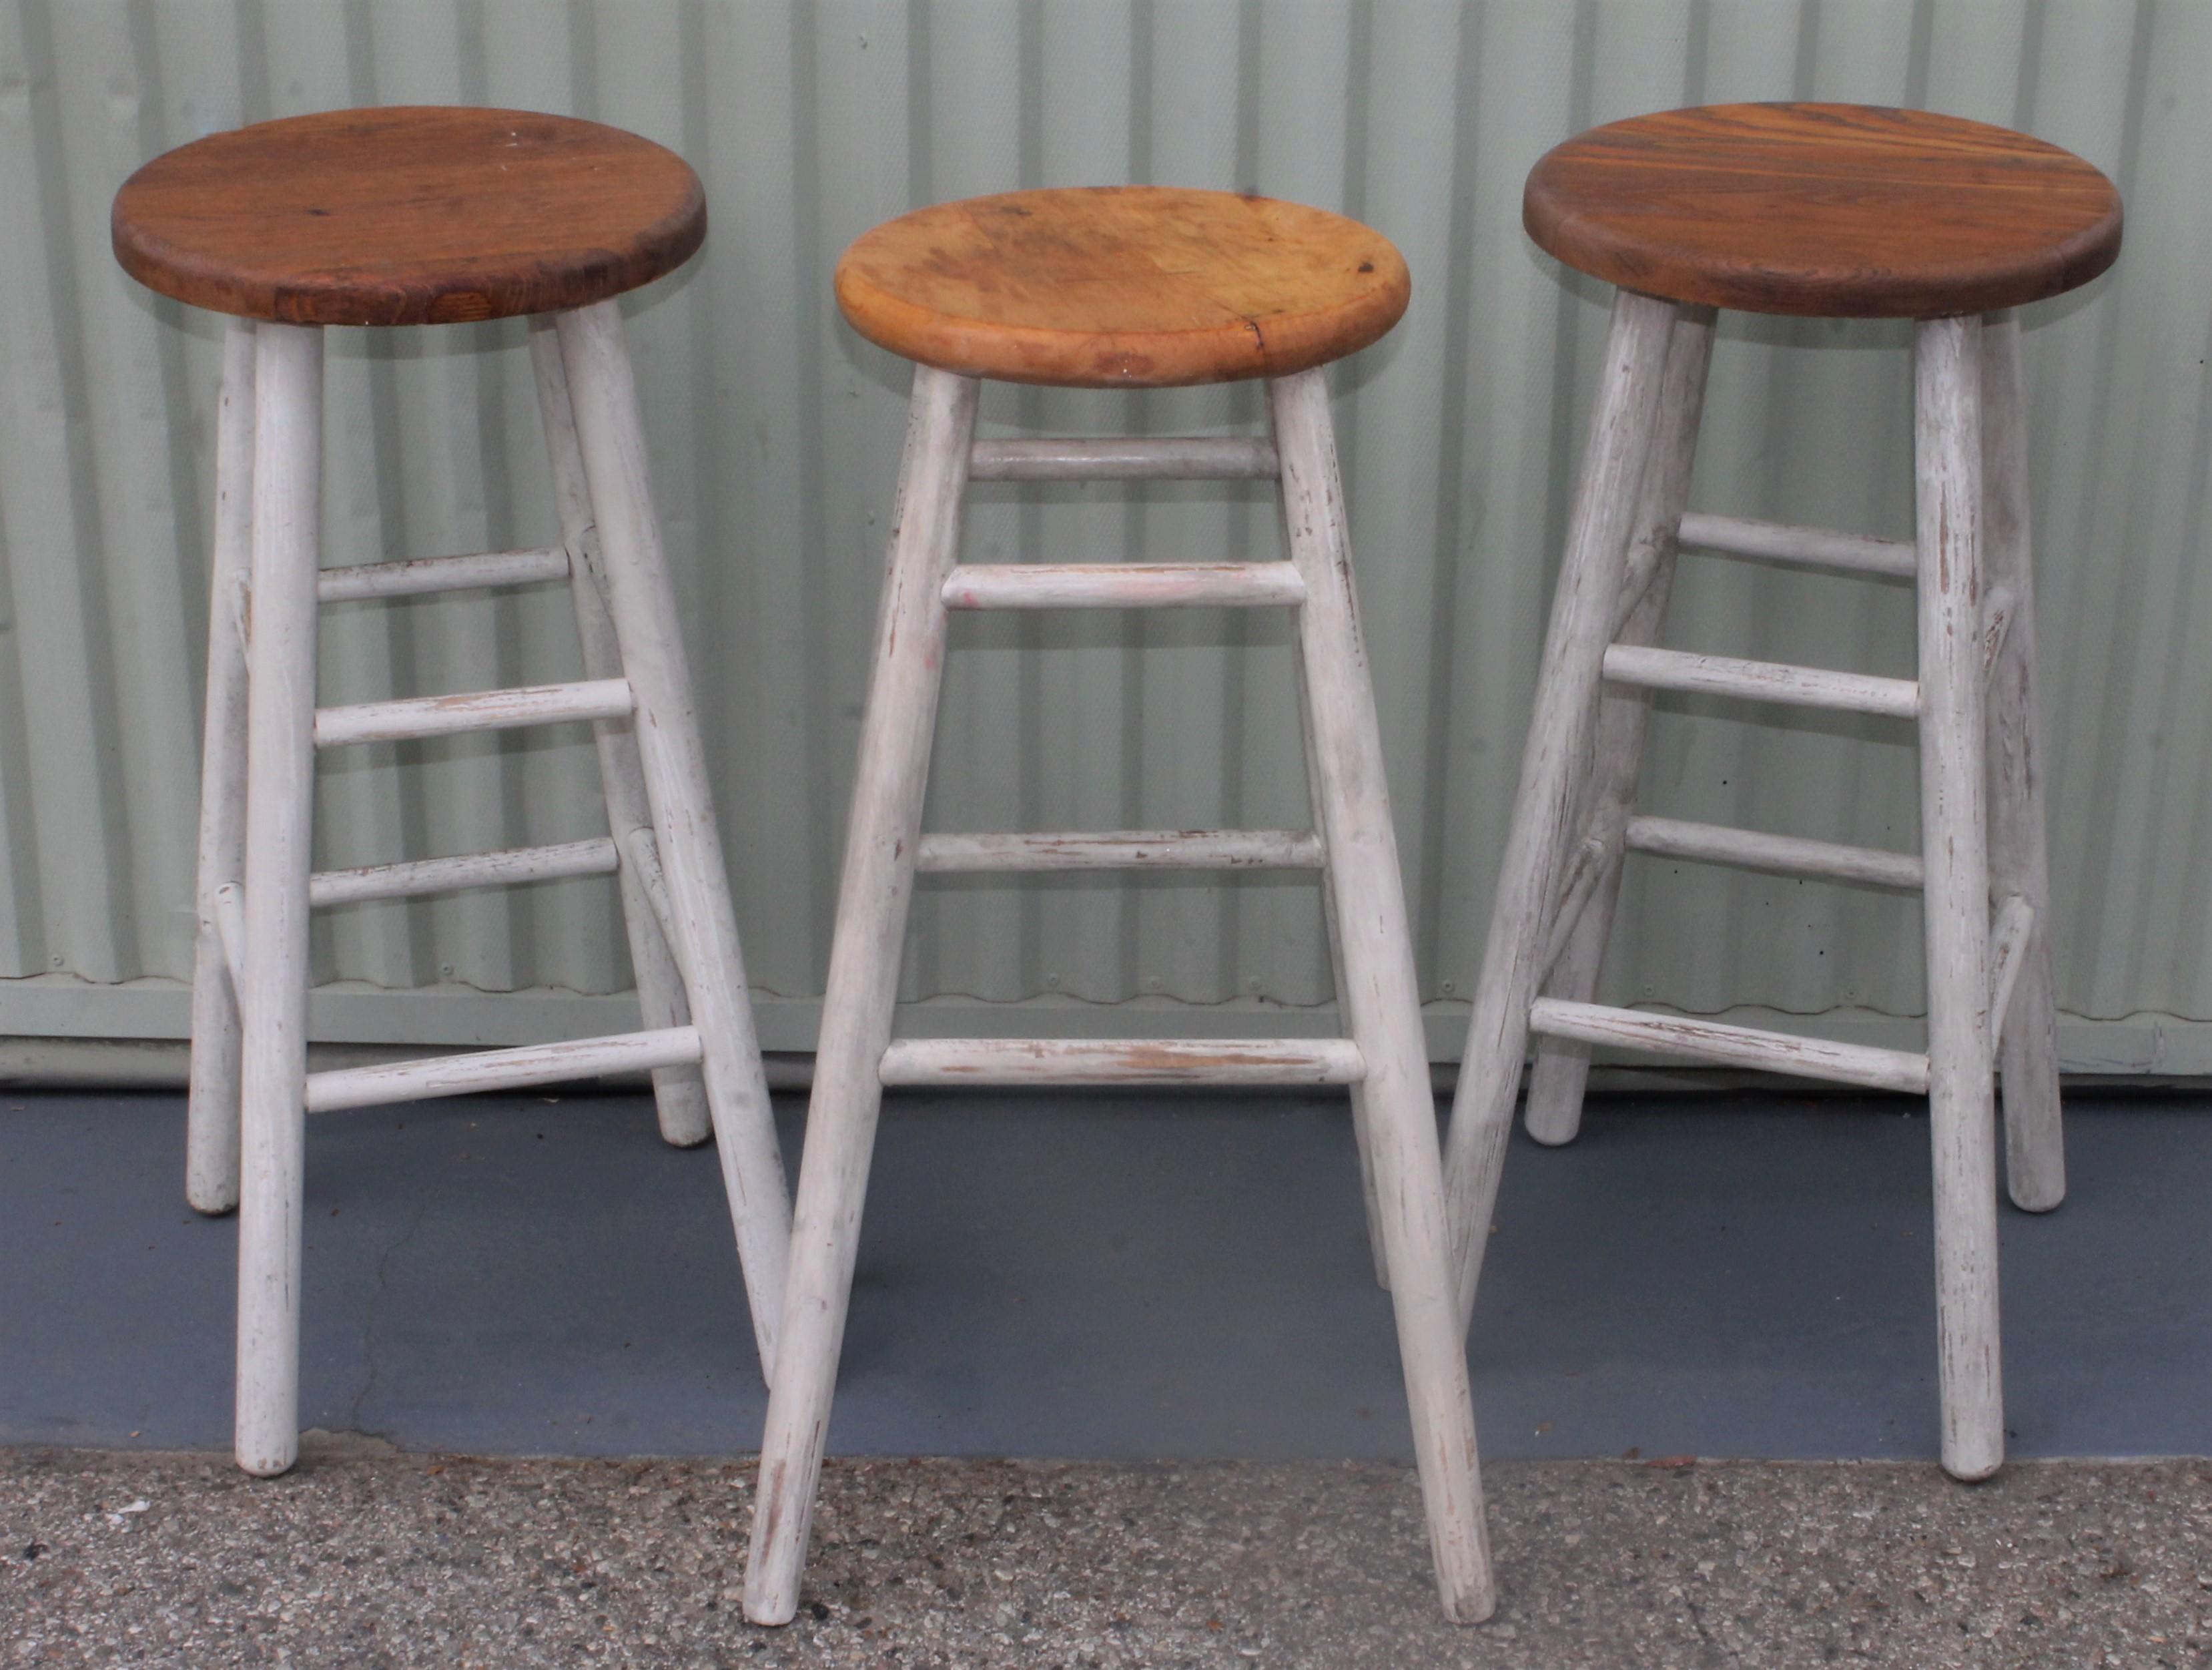 This collection of three white painted pine bar stools have original oak seats and are in very sturdy condition. There is a pair of matching and one added to the pair.